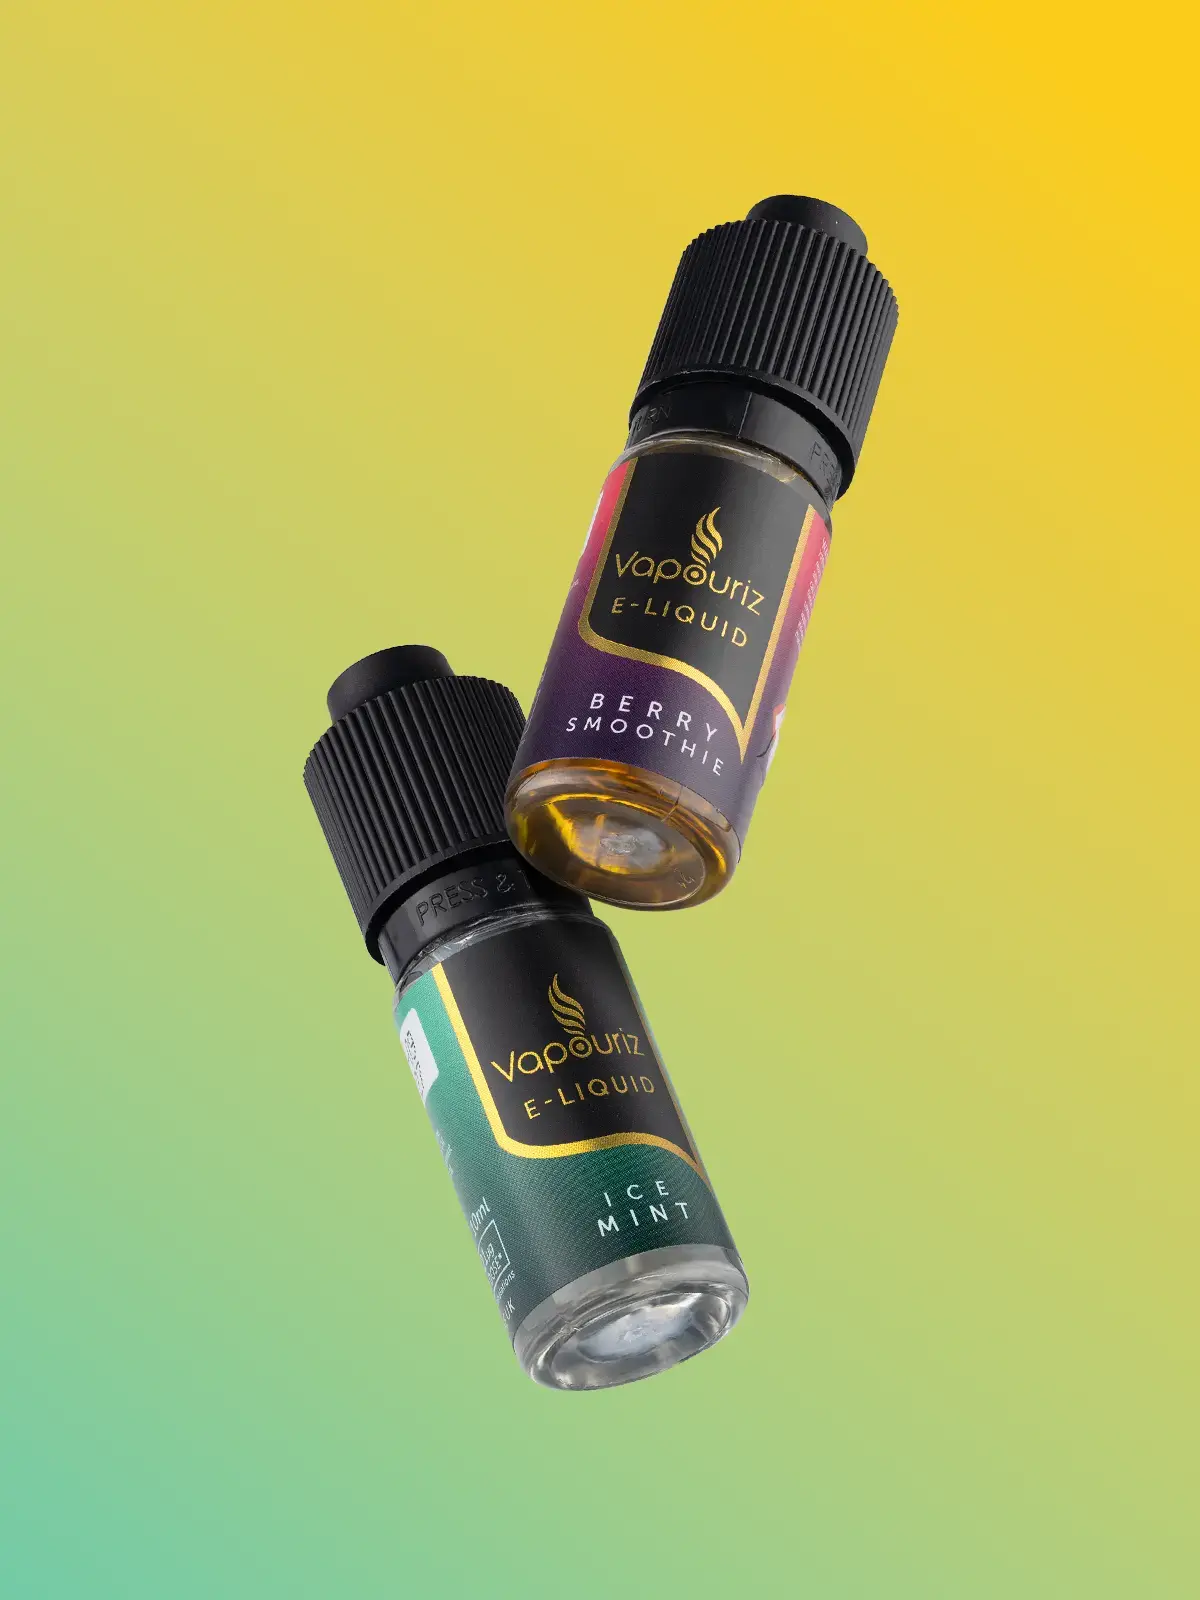 Two bottles of Vapouriz e-liquid including Ice Mint and Berry Smoothie, floating in front of a yellow and green background